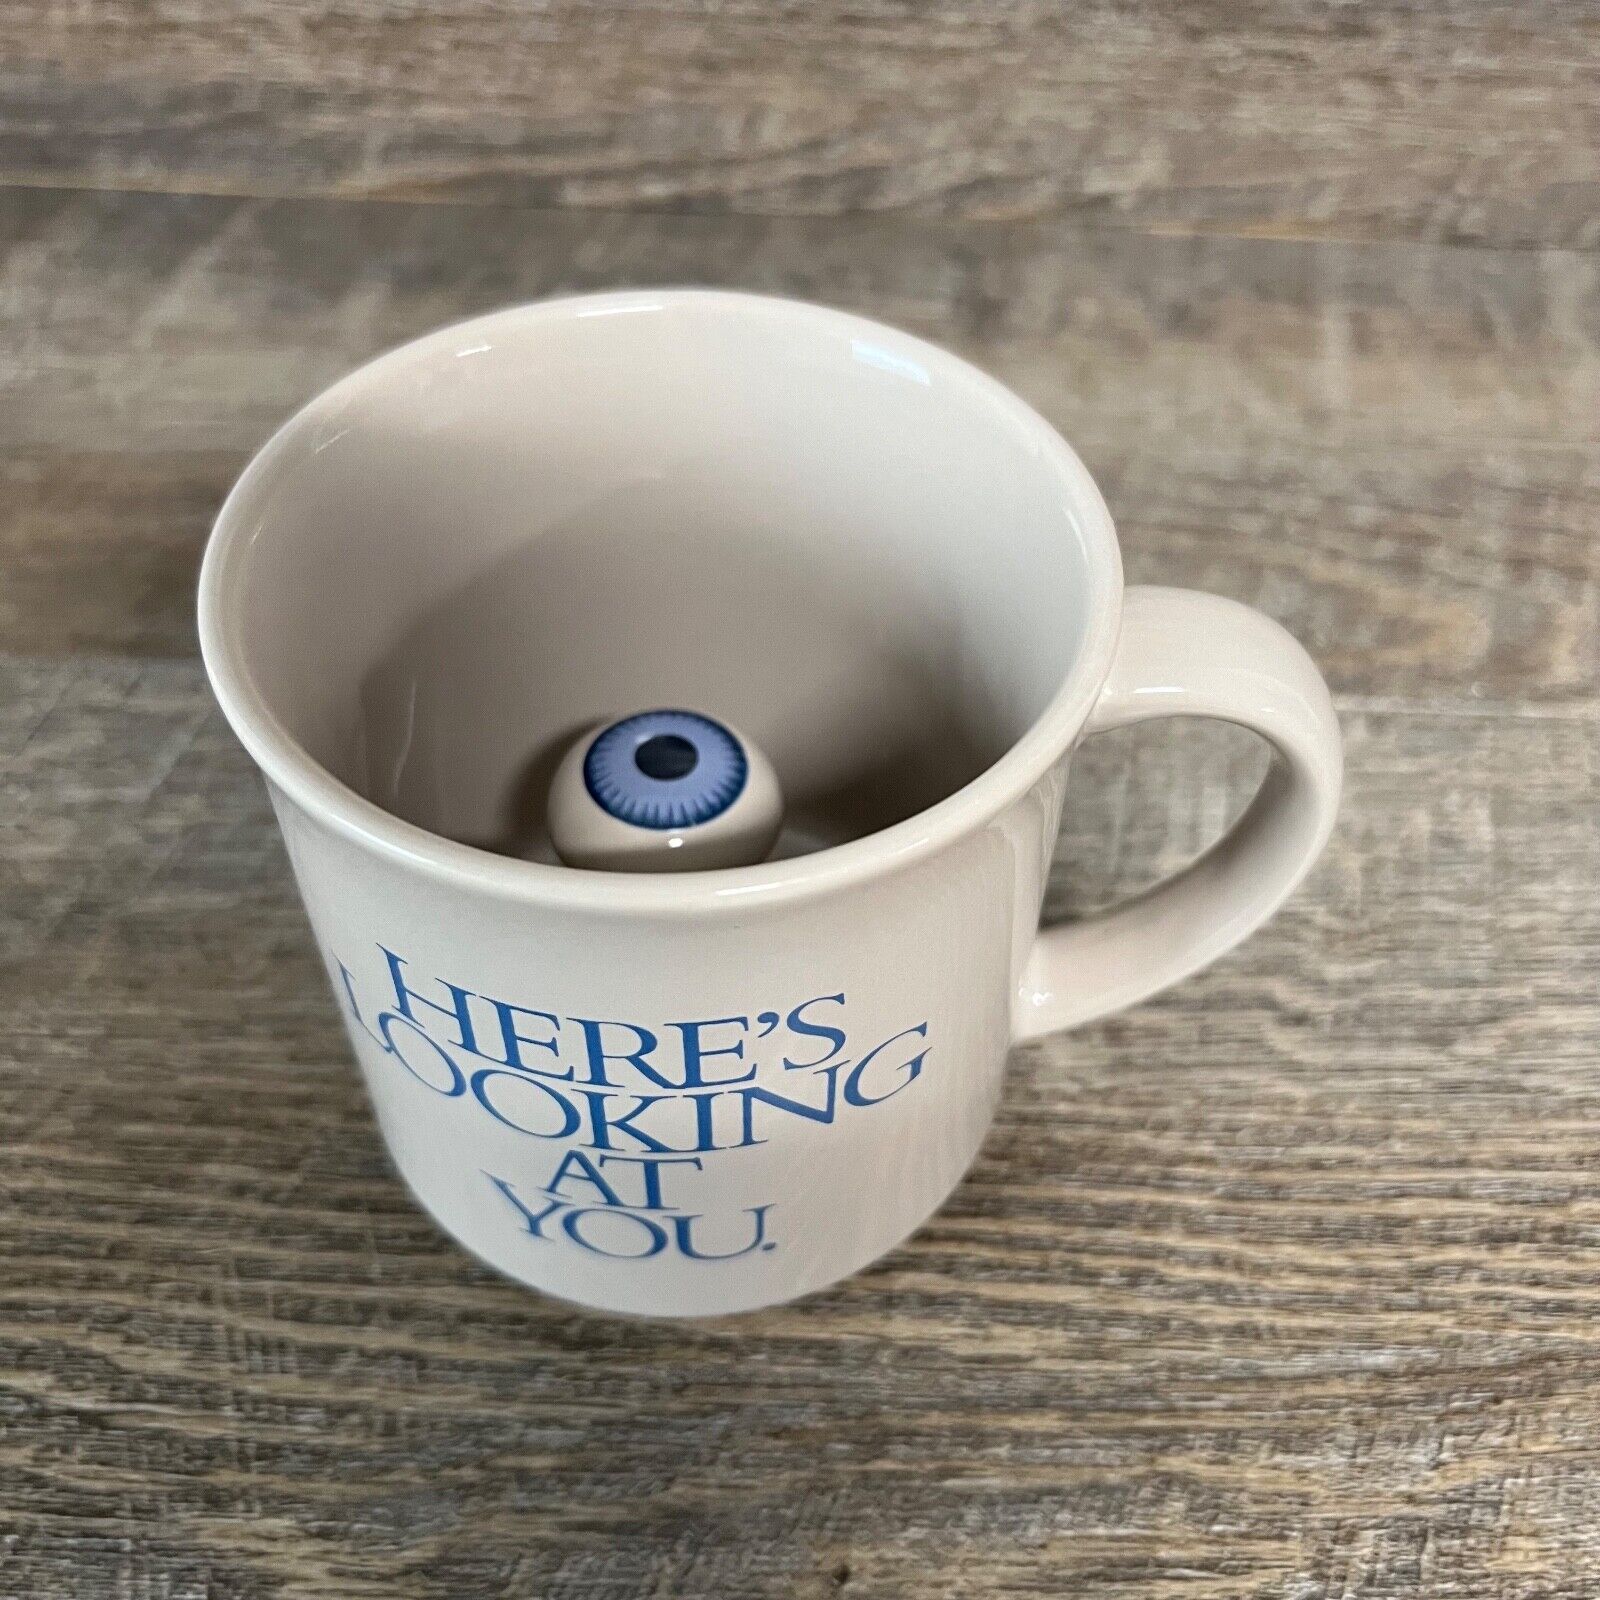 Here's Looking At You 3D Blue Eyeball Coffee Mug Japan  Recycled Paper Products